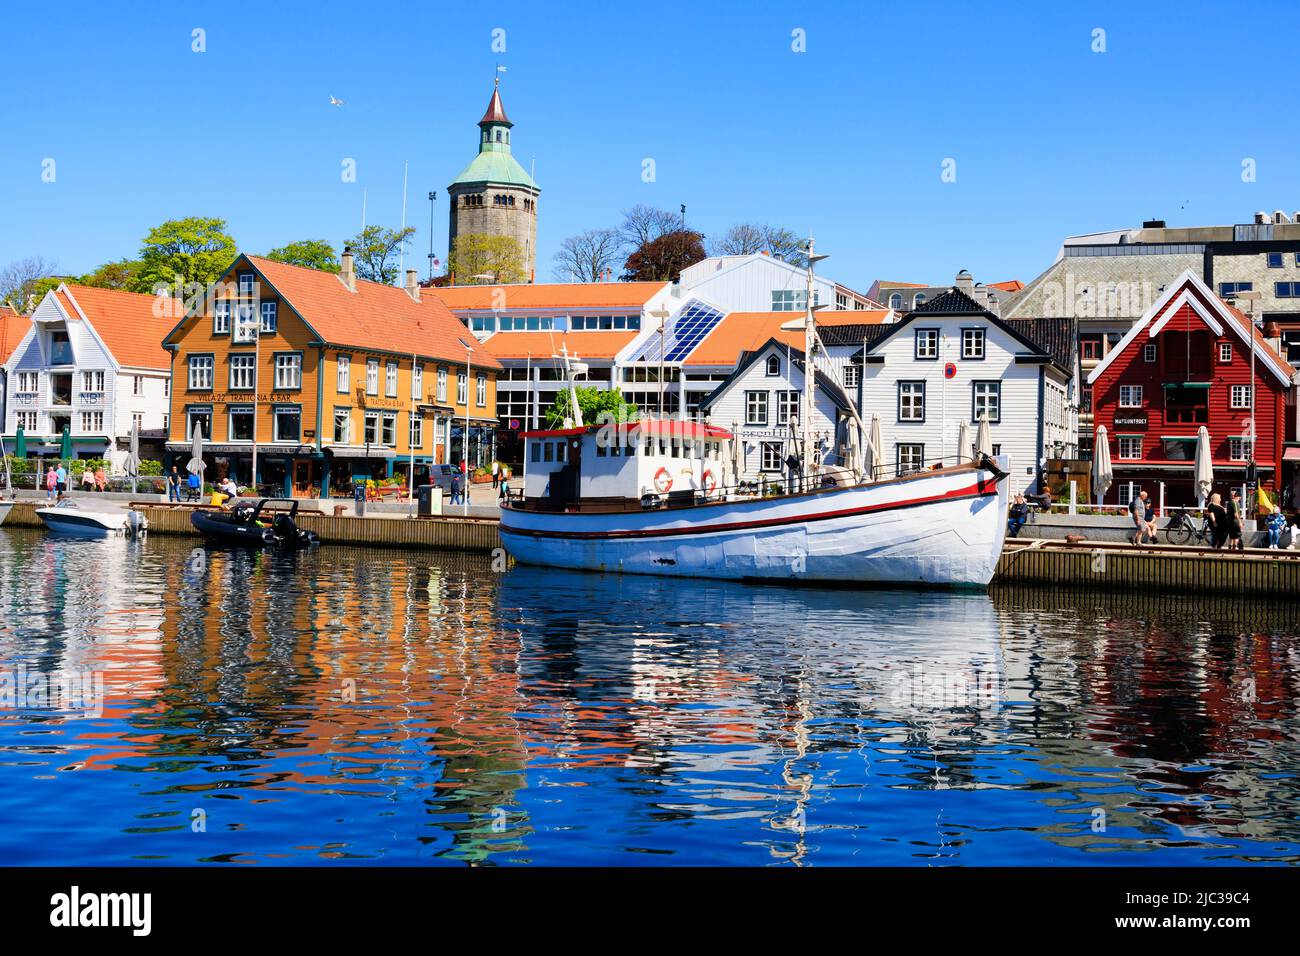 Traditional Norwegian fishing boat moored in Stavanger harbour. Old quayside warehouses are now trendy restaurants, bars and cafes., Norway. In the ba Stock Photo